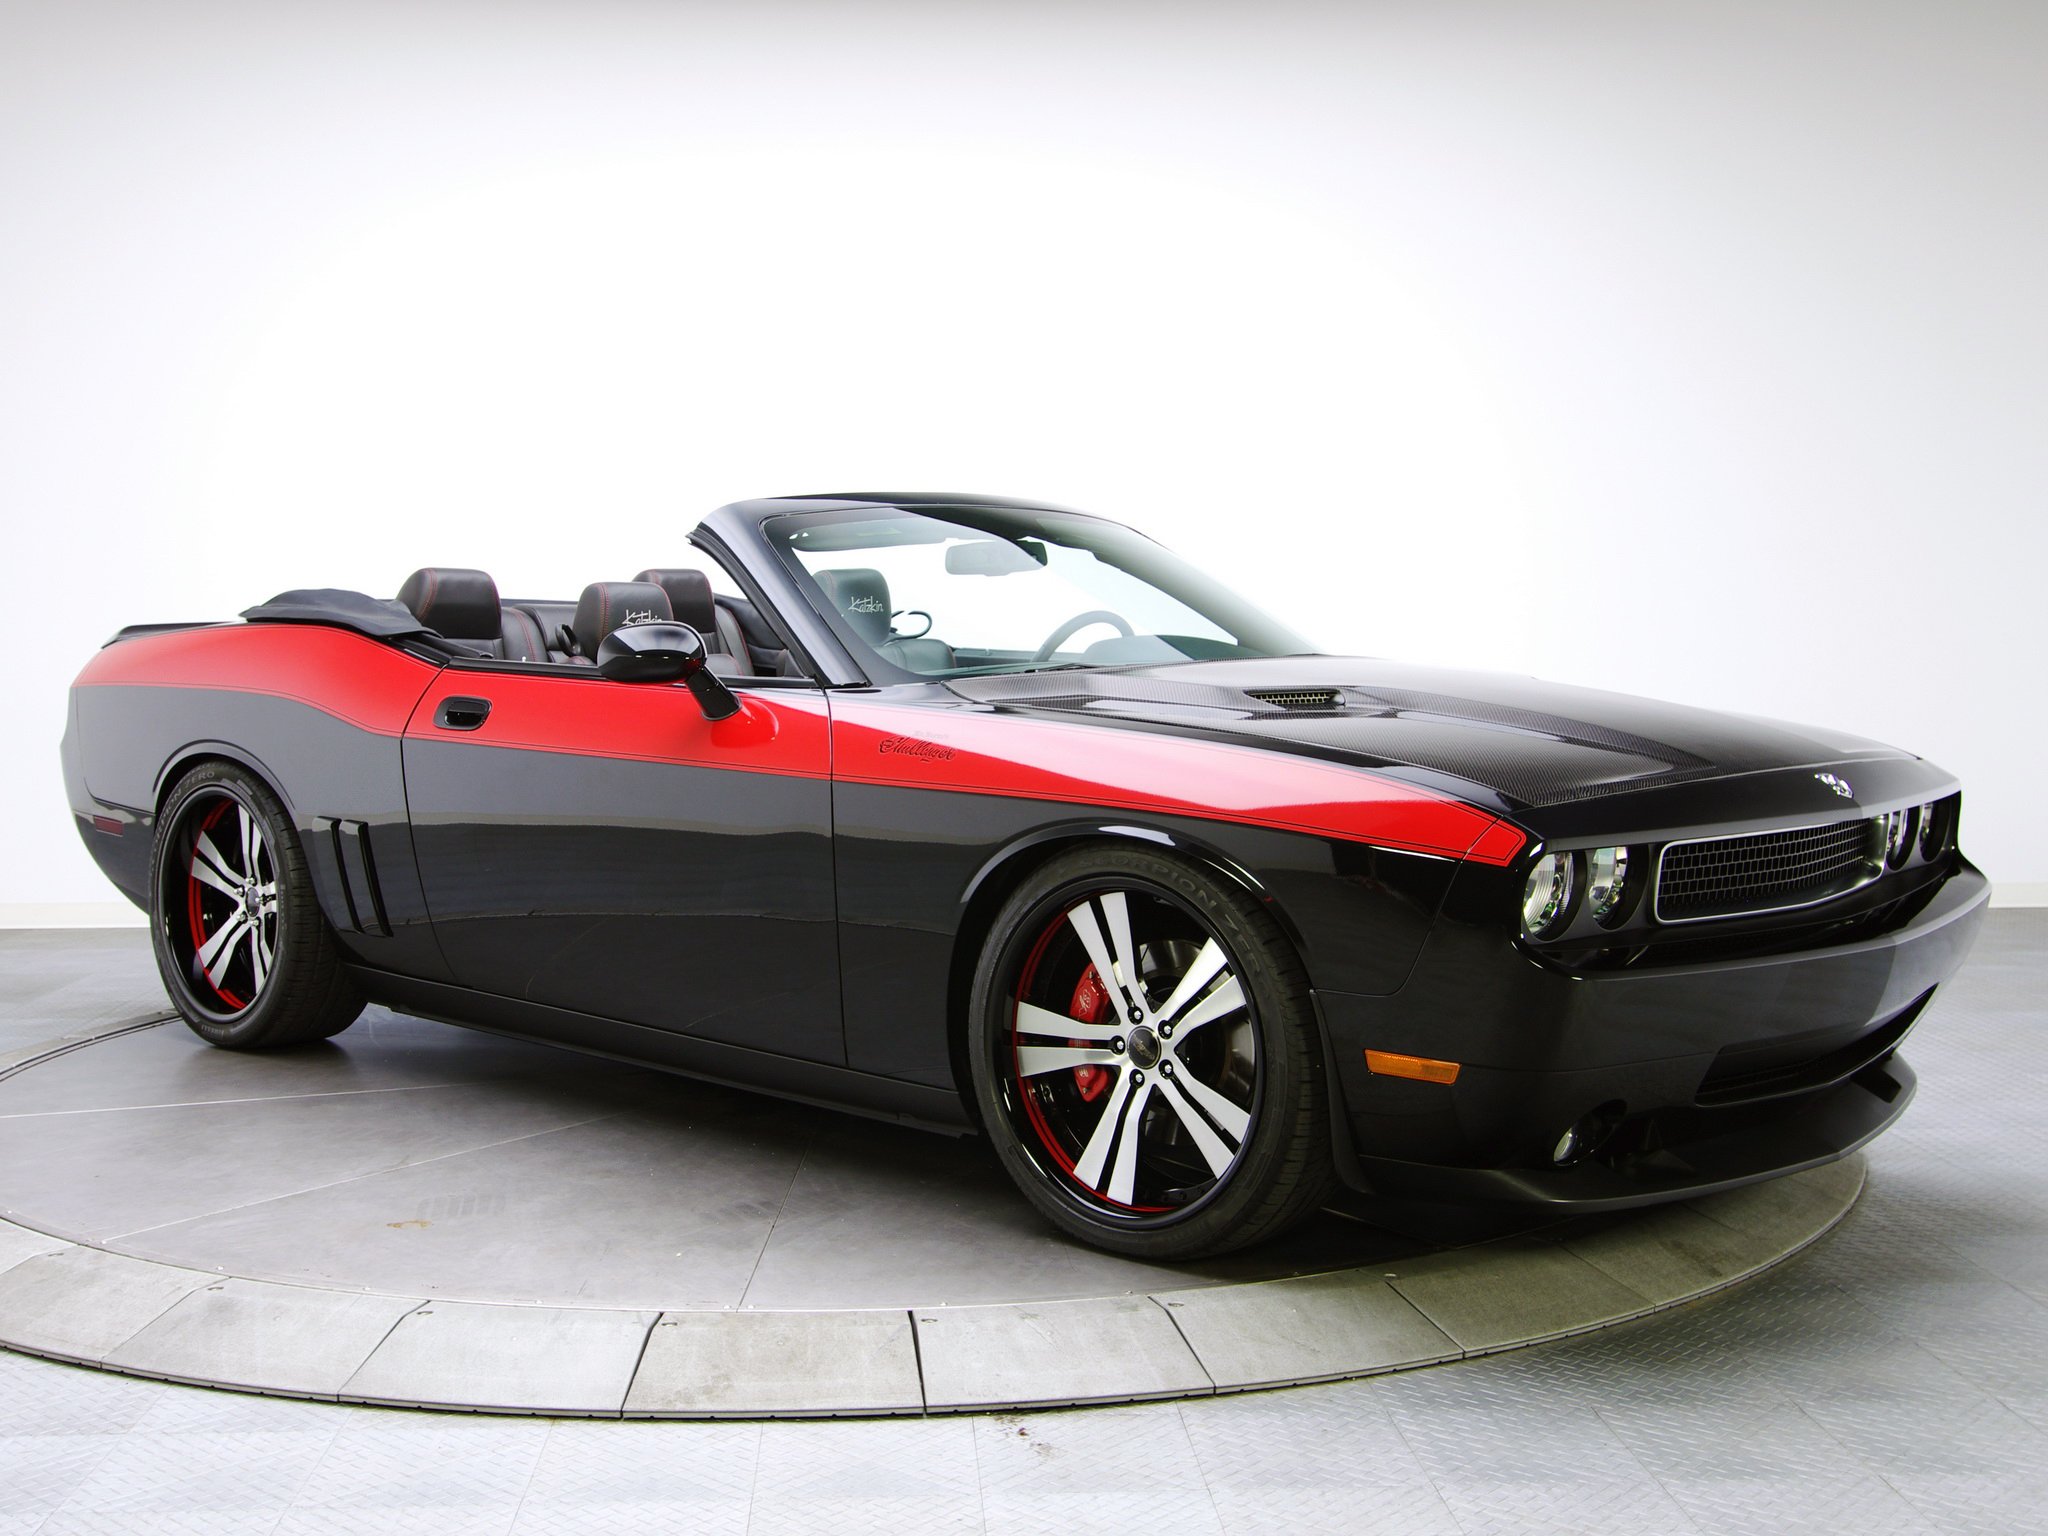 2008, Mr, Norms, Dodge, Challenger, Convertible,  l c , Tuning, Muscle Wallpaper